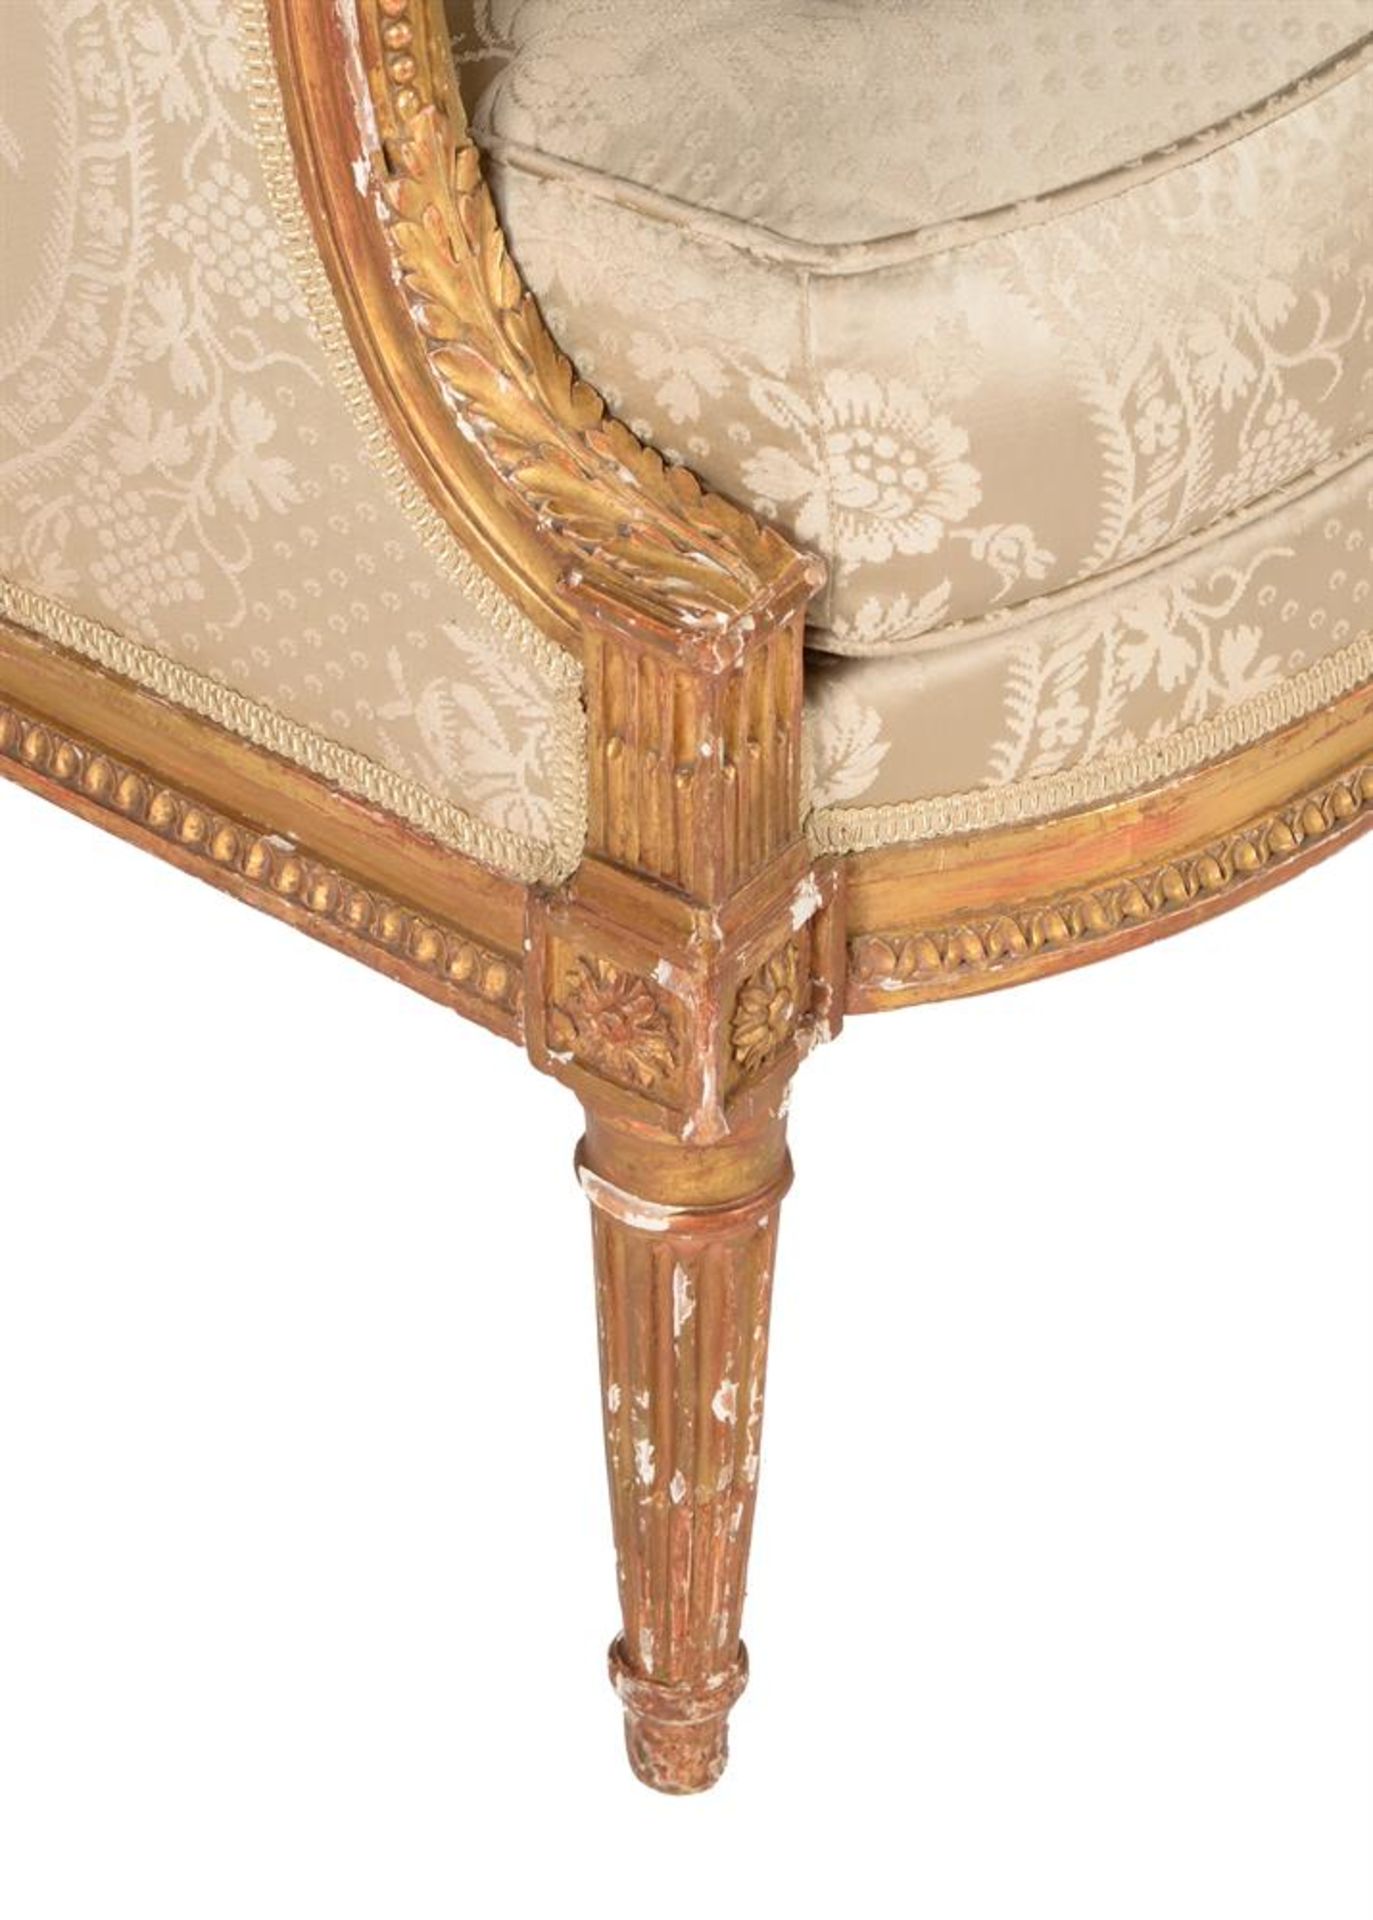 A LOUIS XVI GILTWOOD AND UPHOLSTERED BERGERE BY ADRIEN-PIERRE DUPAIN, CIRCA 1780 - Image 3 of 5